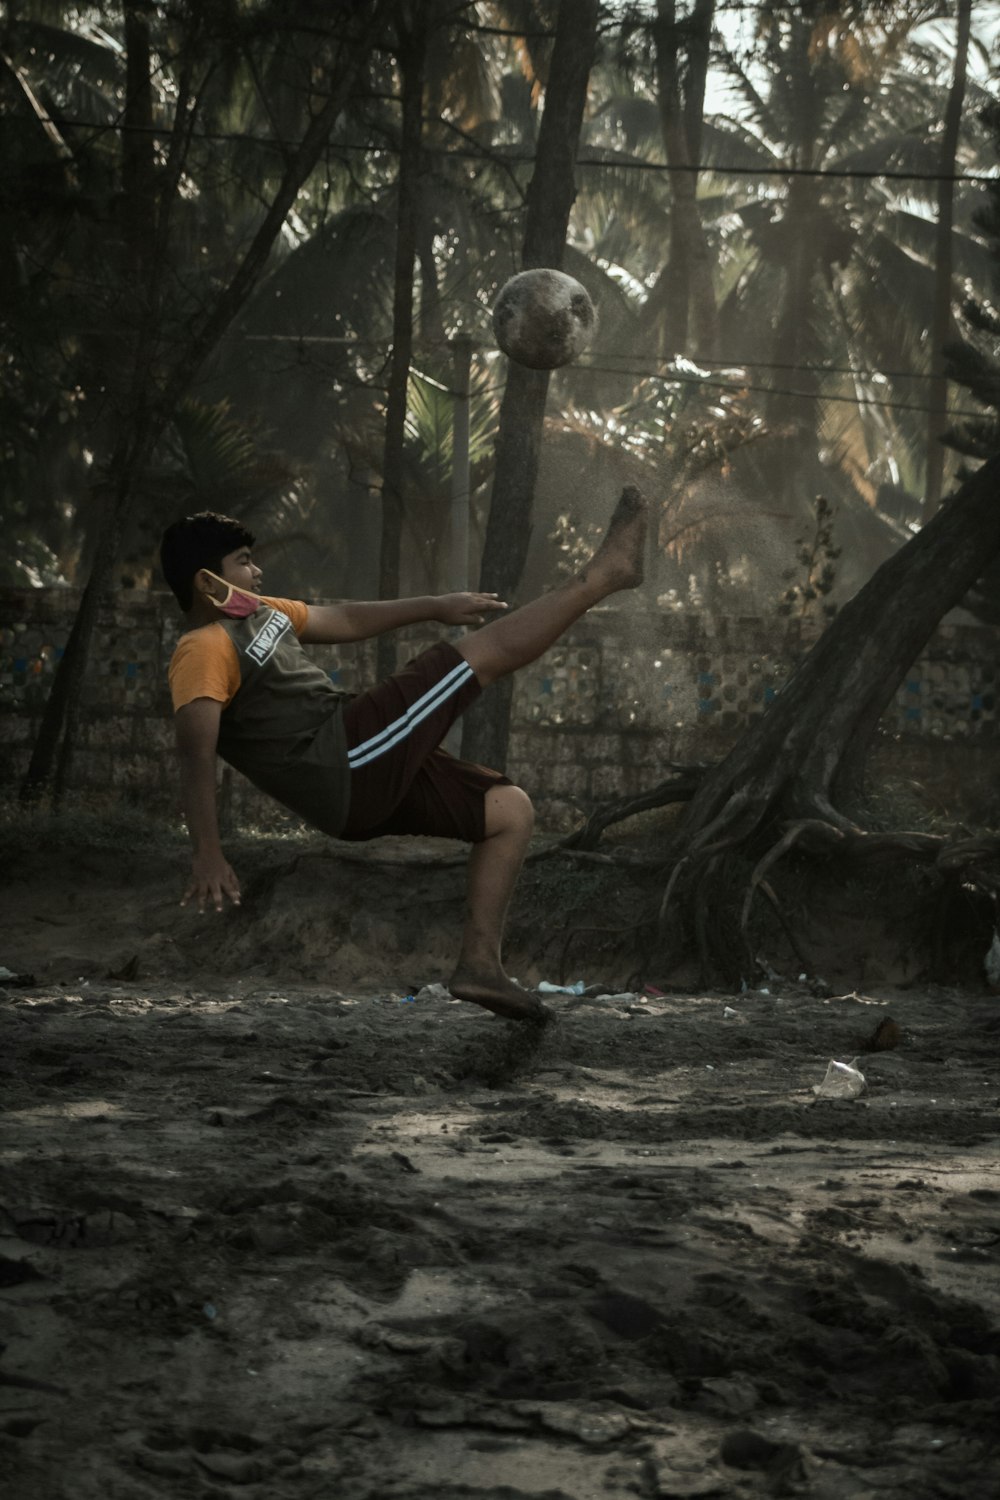 a man kicking a soccer ball in a forest